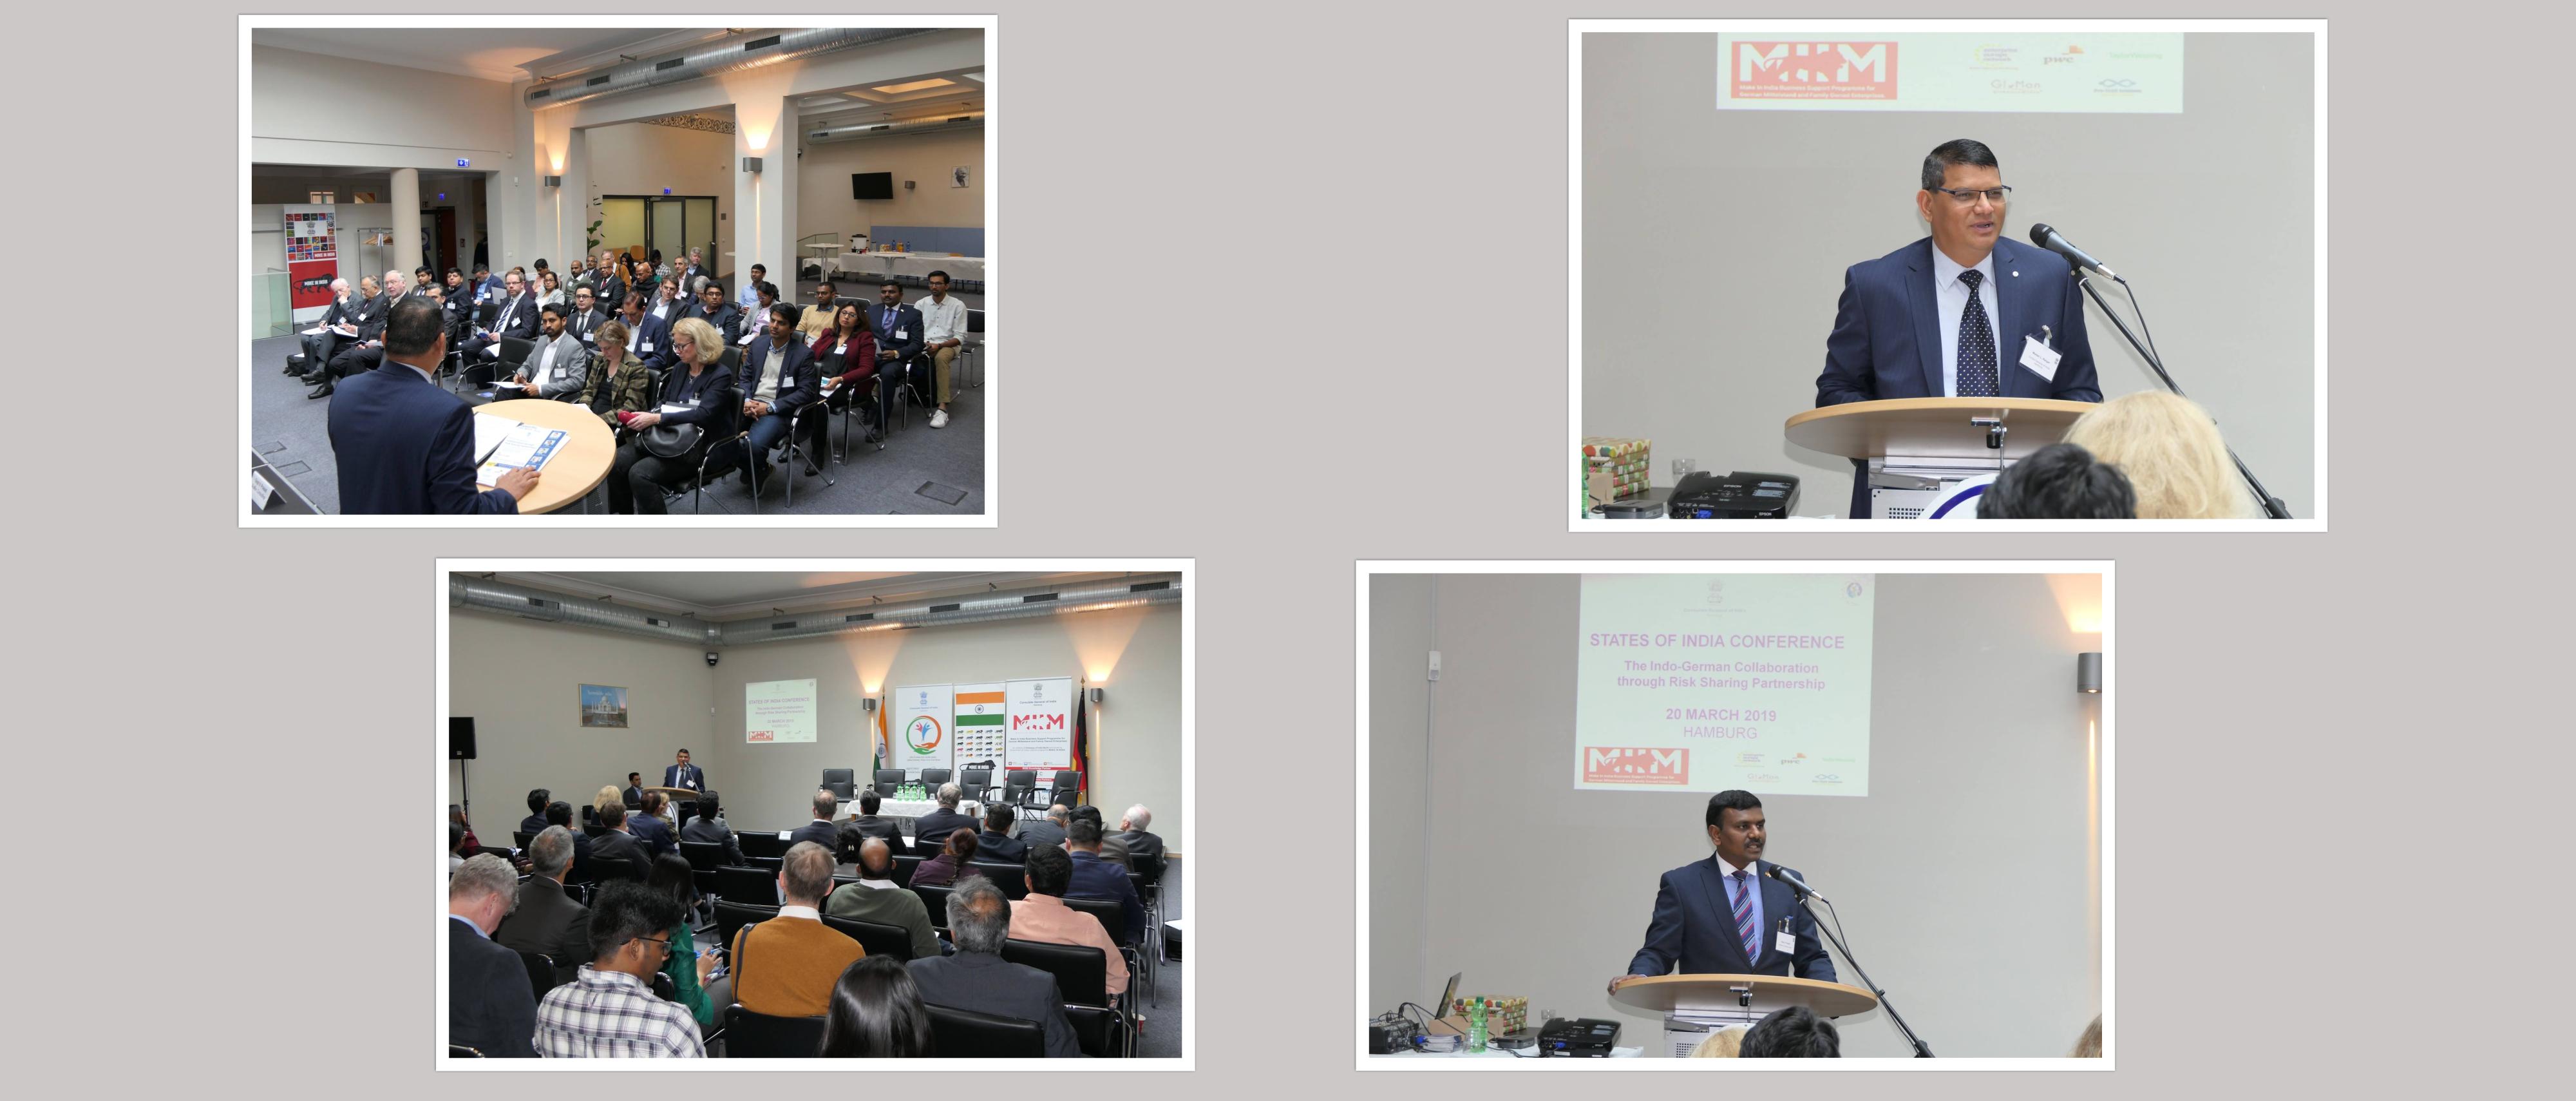  State of India Conference at Hamburg (March 20, 2019)